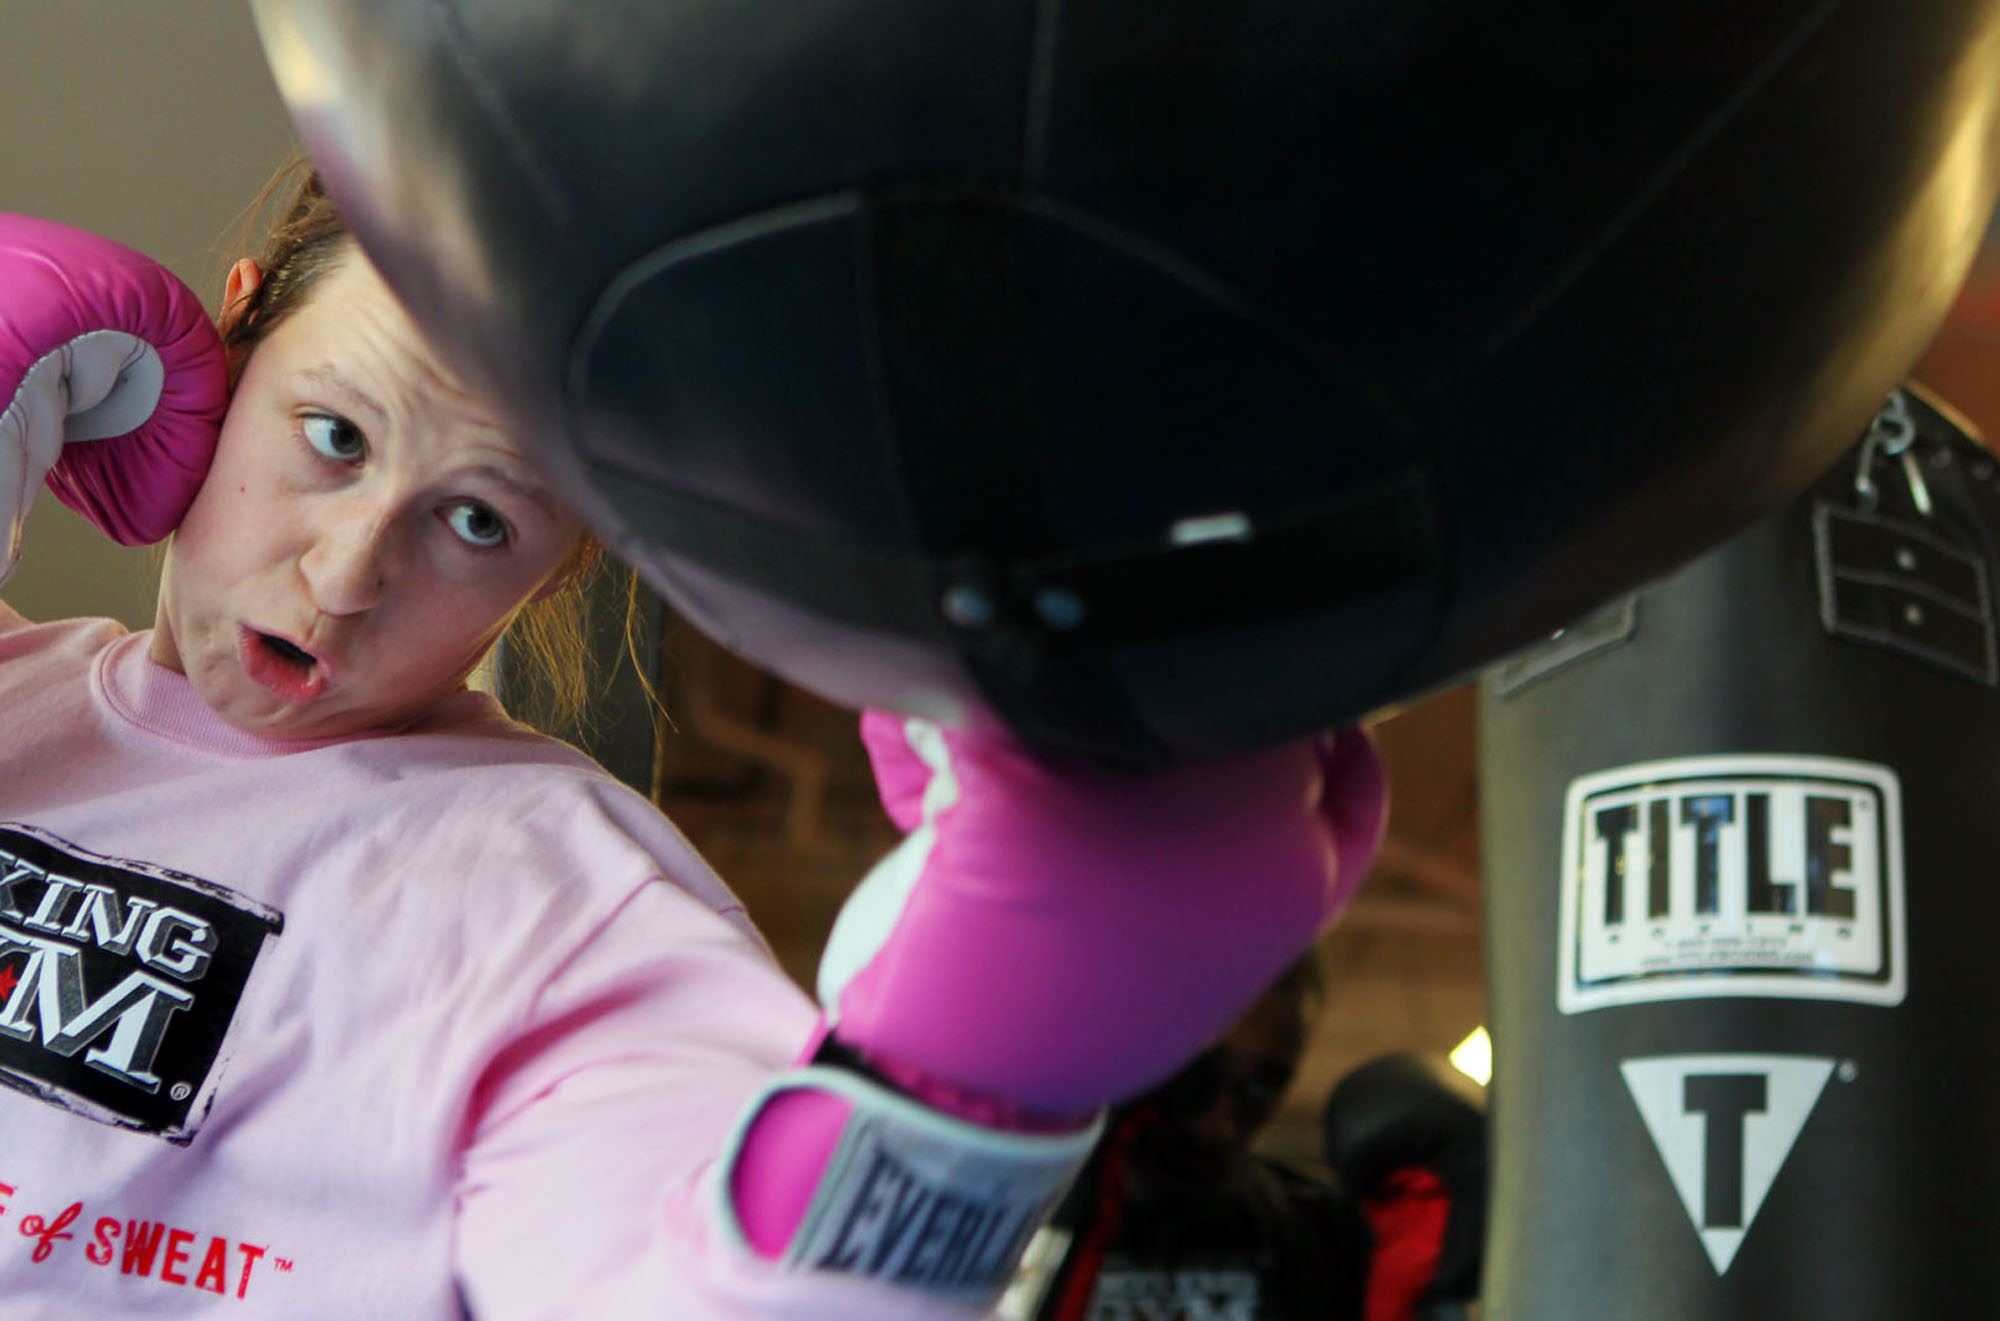 Click here to view story: Becoming a Fighter, A St. Louis U. nursing student finds herself in boxing.